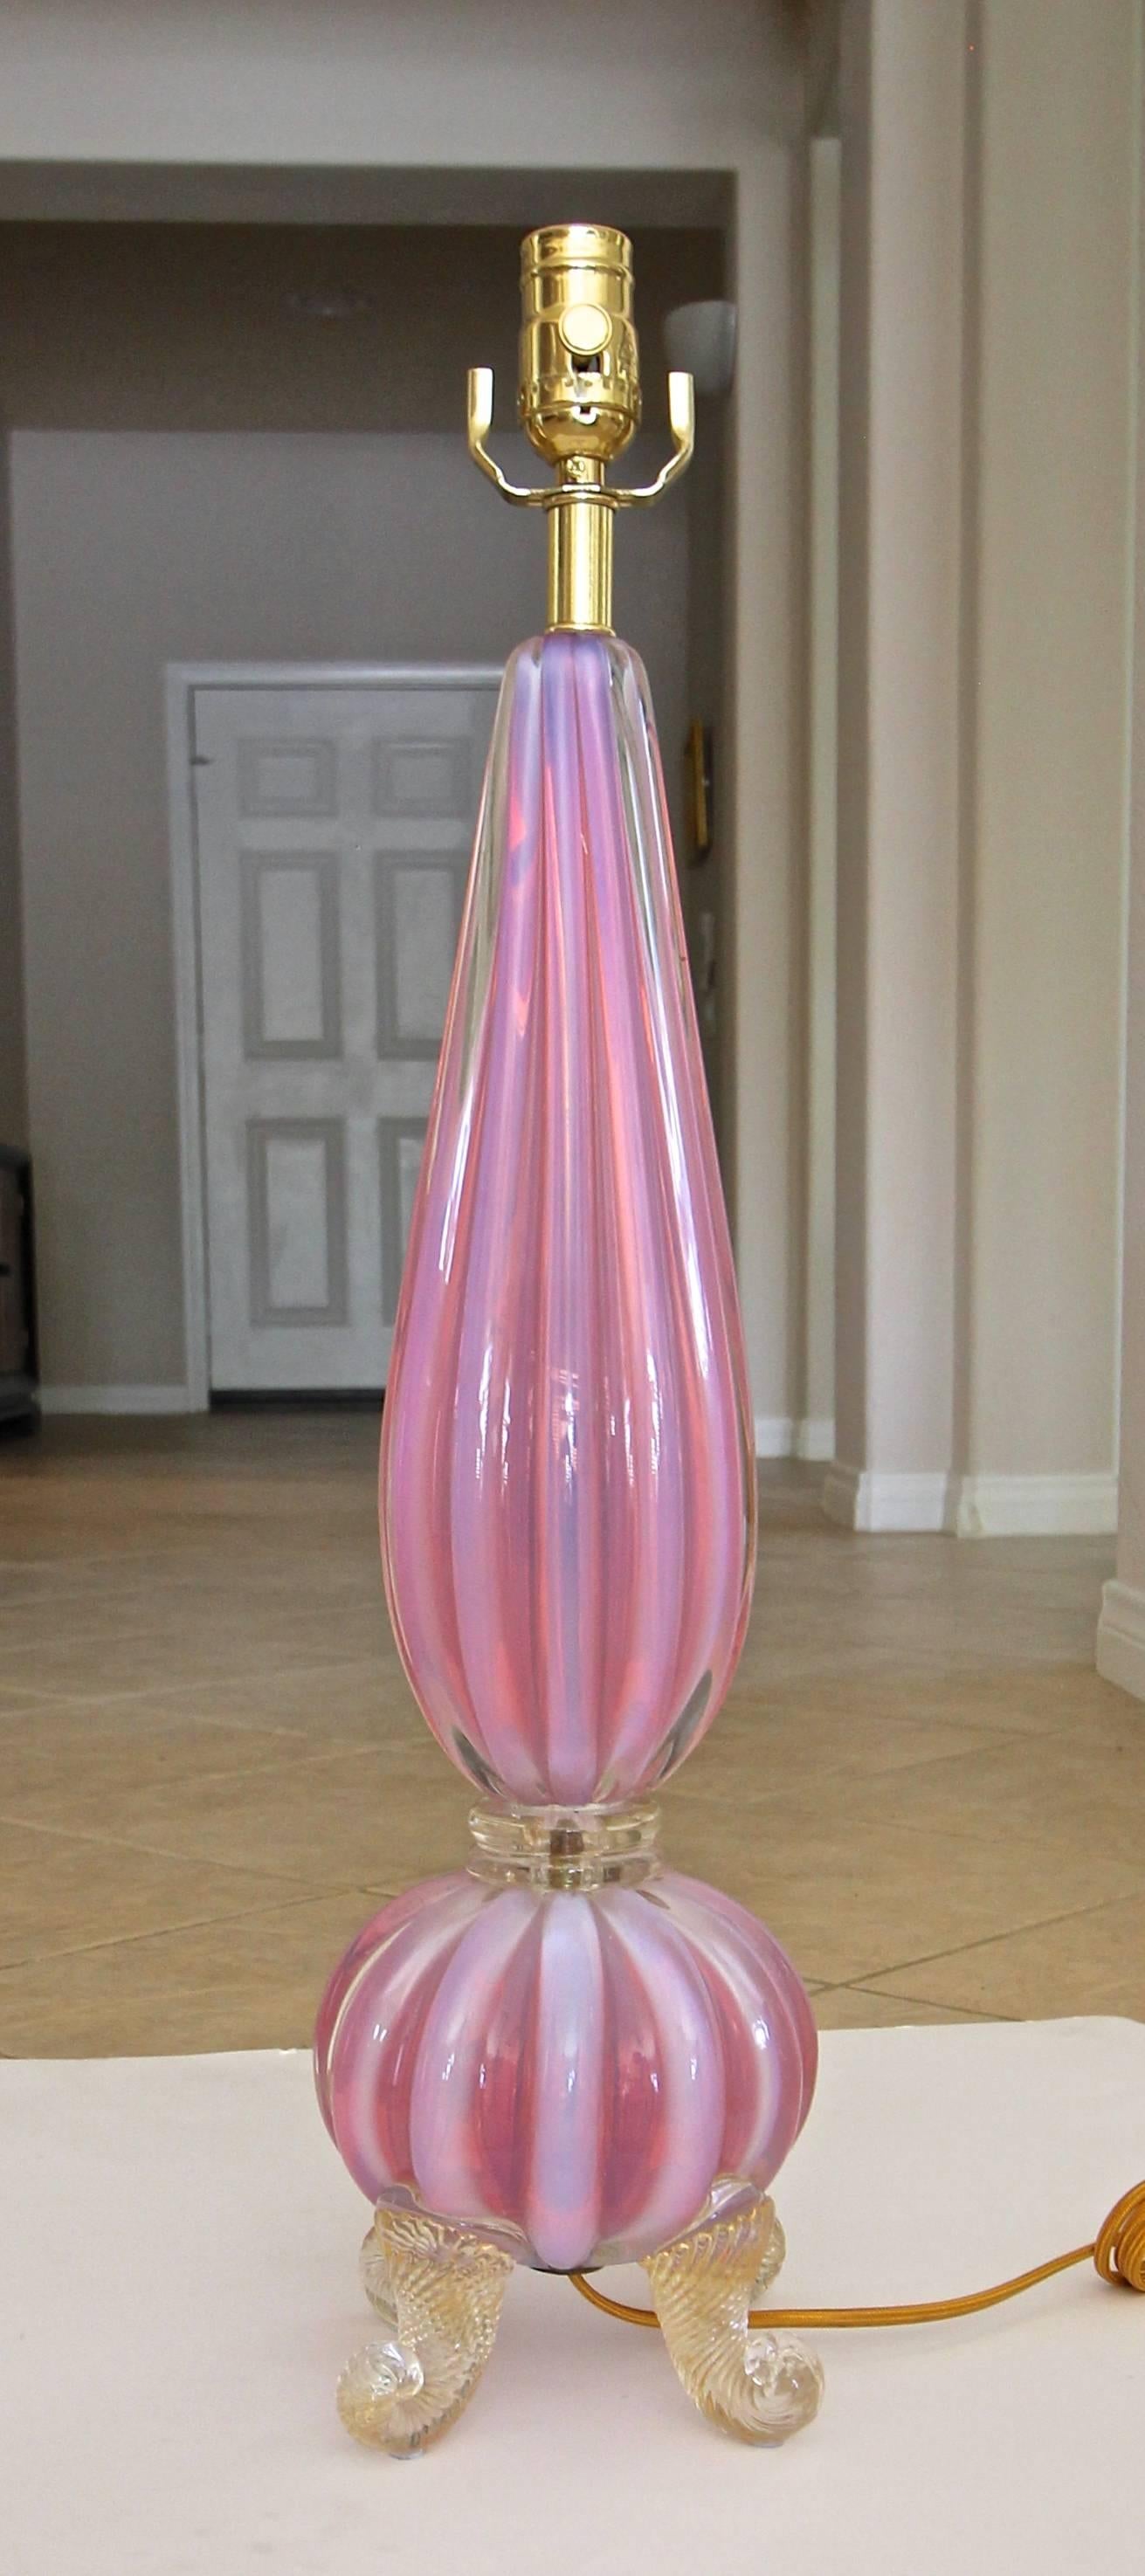 Mid-20th Century Barovier Murano Pink Opalescent and Gold Glass Footed Table Lamp